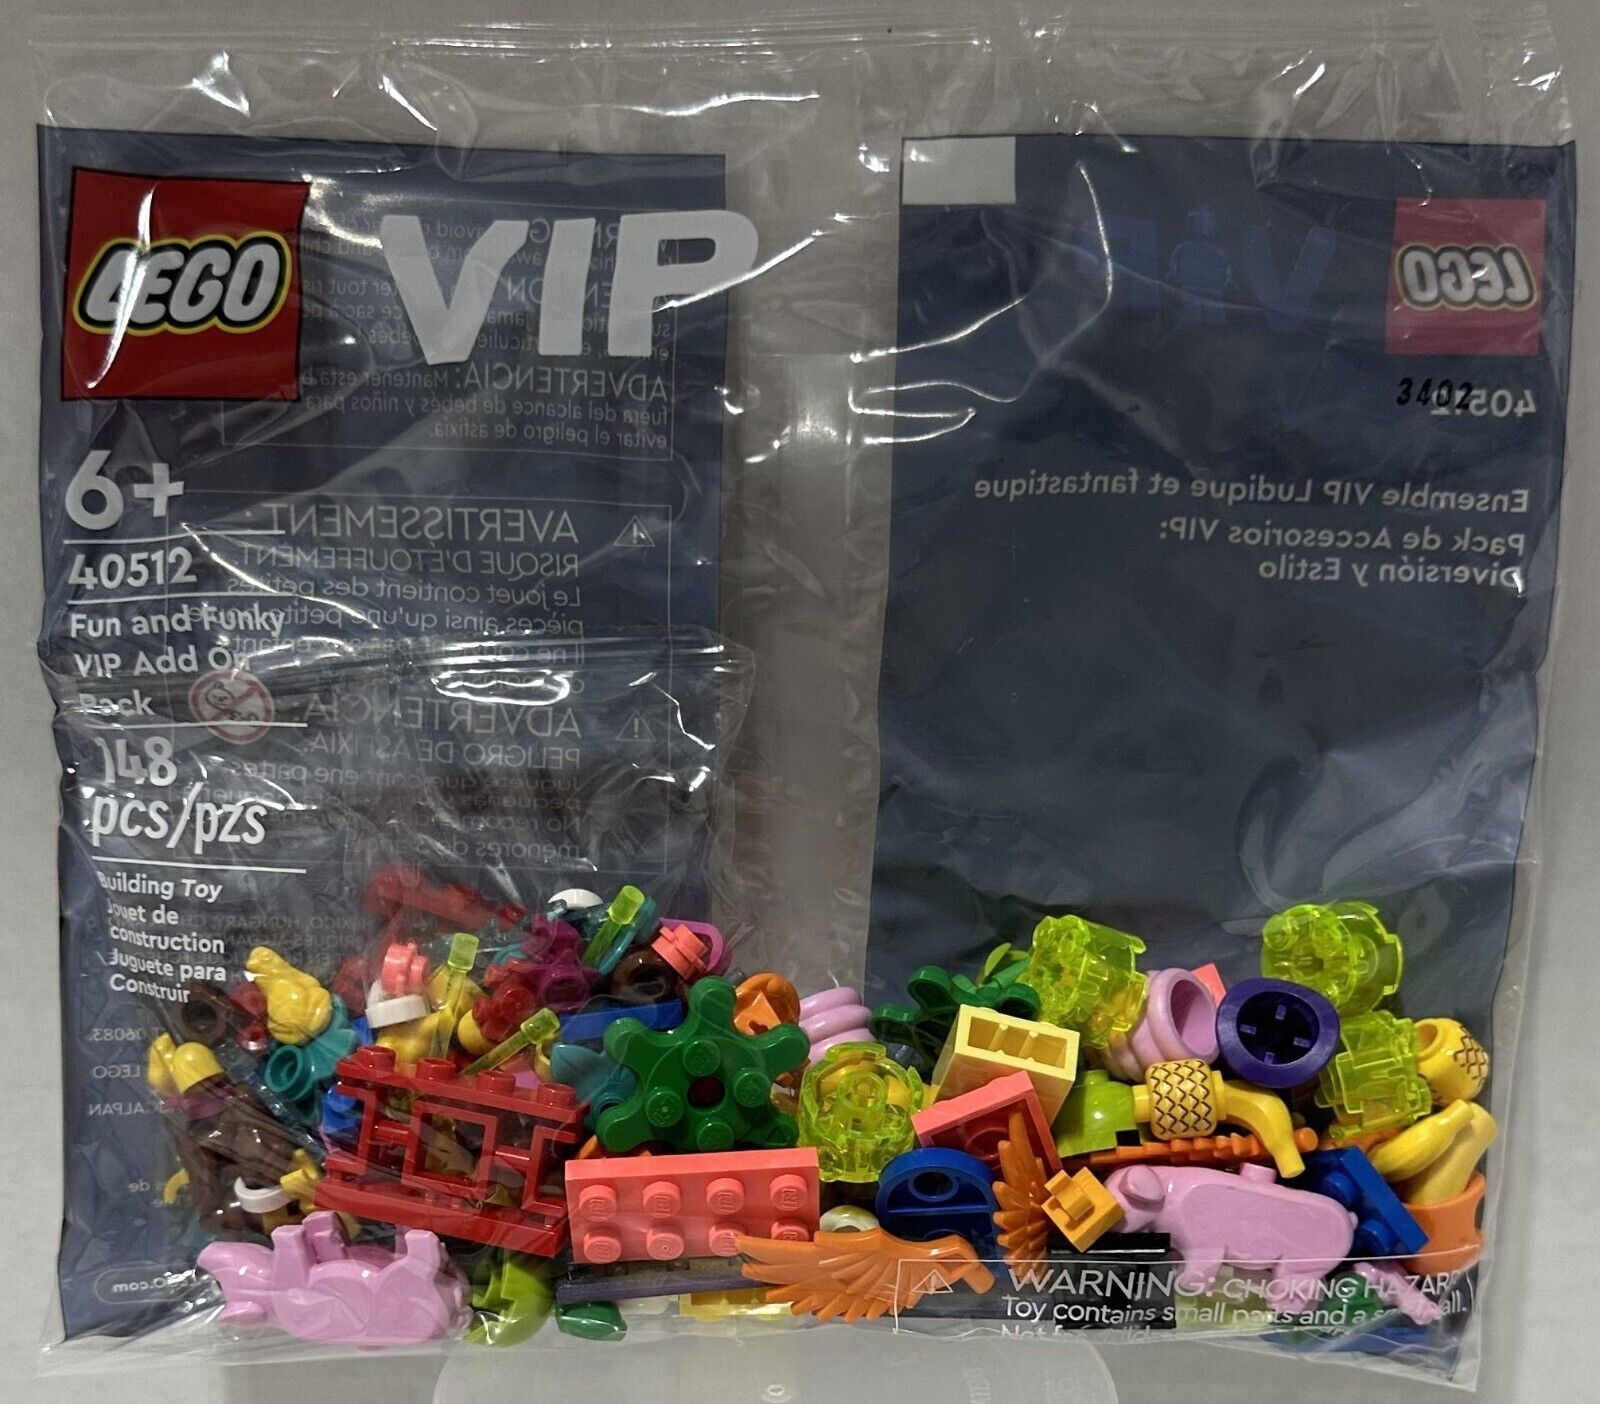 Primary image for Lego VIP #40512 Fun And Funky VIP Add On Pack 148pcs 6+